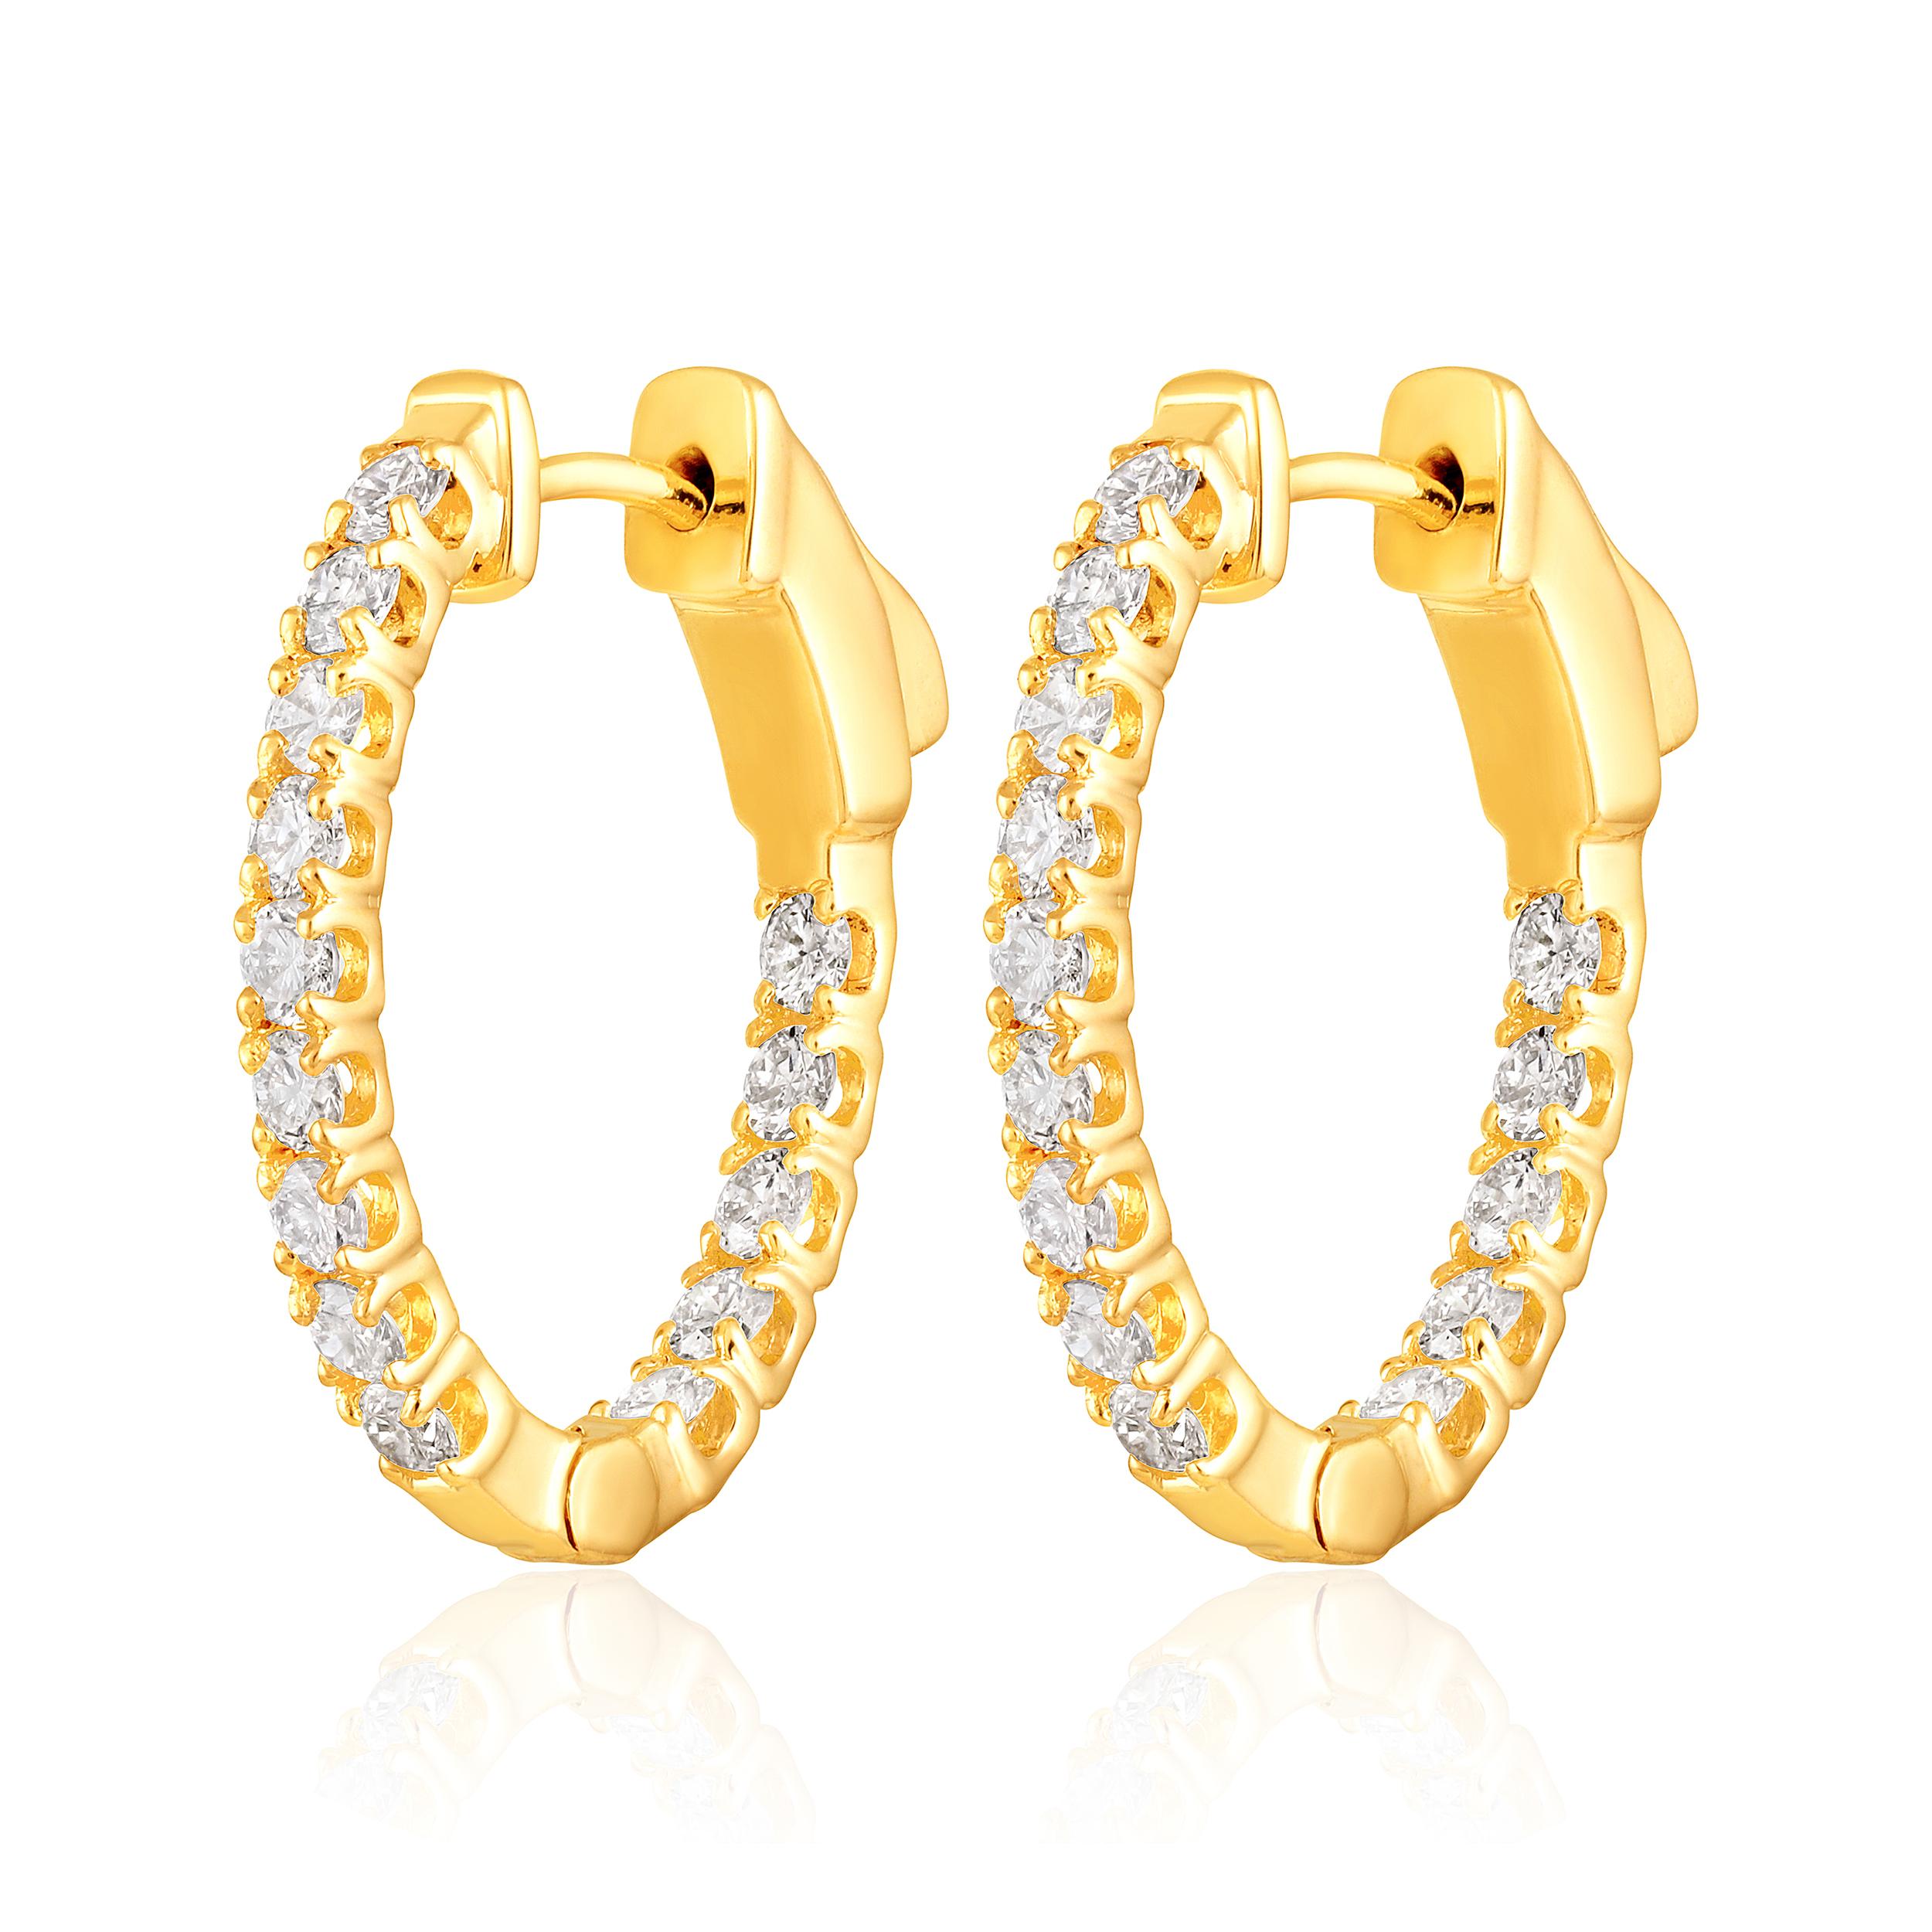 Contemporary Certified 14k Gold 1 Carat Natural Diamond Oval Inside Outside Hoop Earrings For Sale